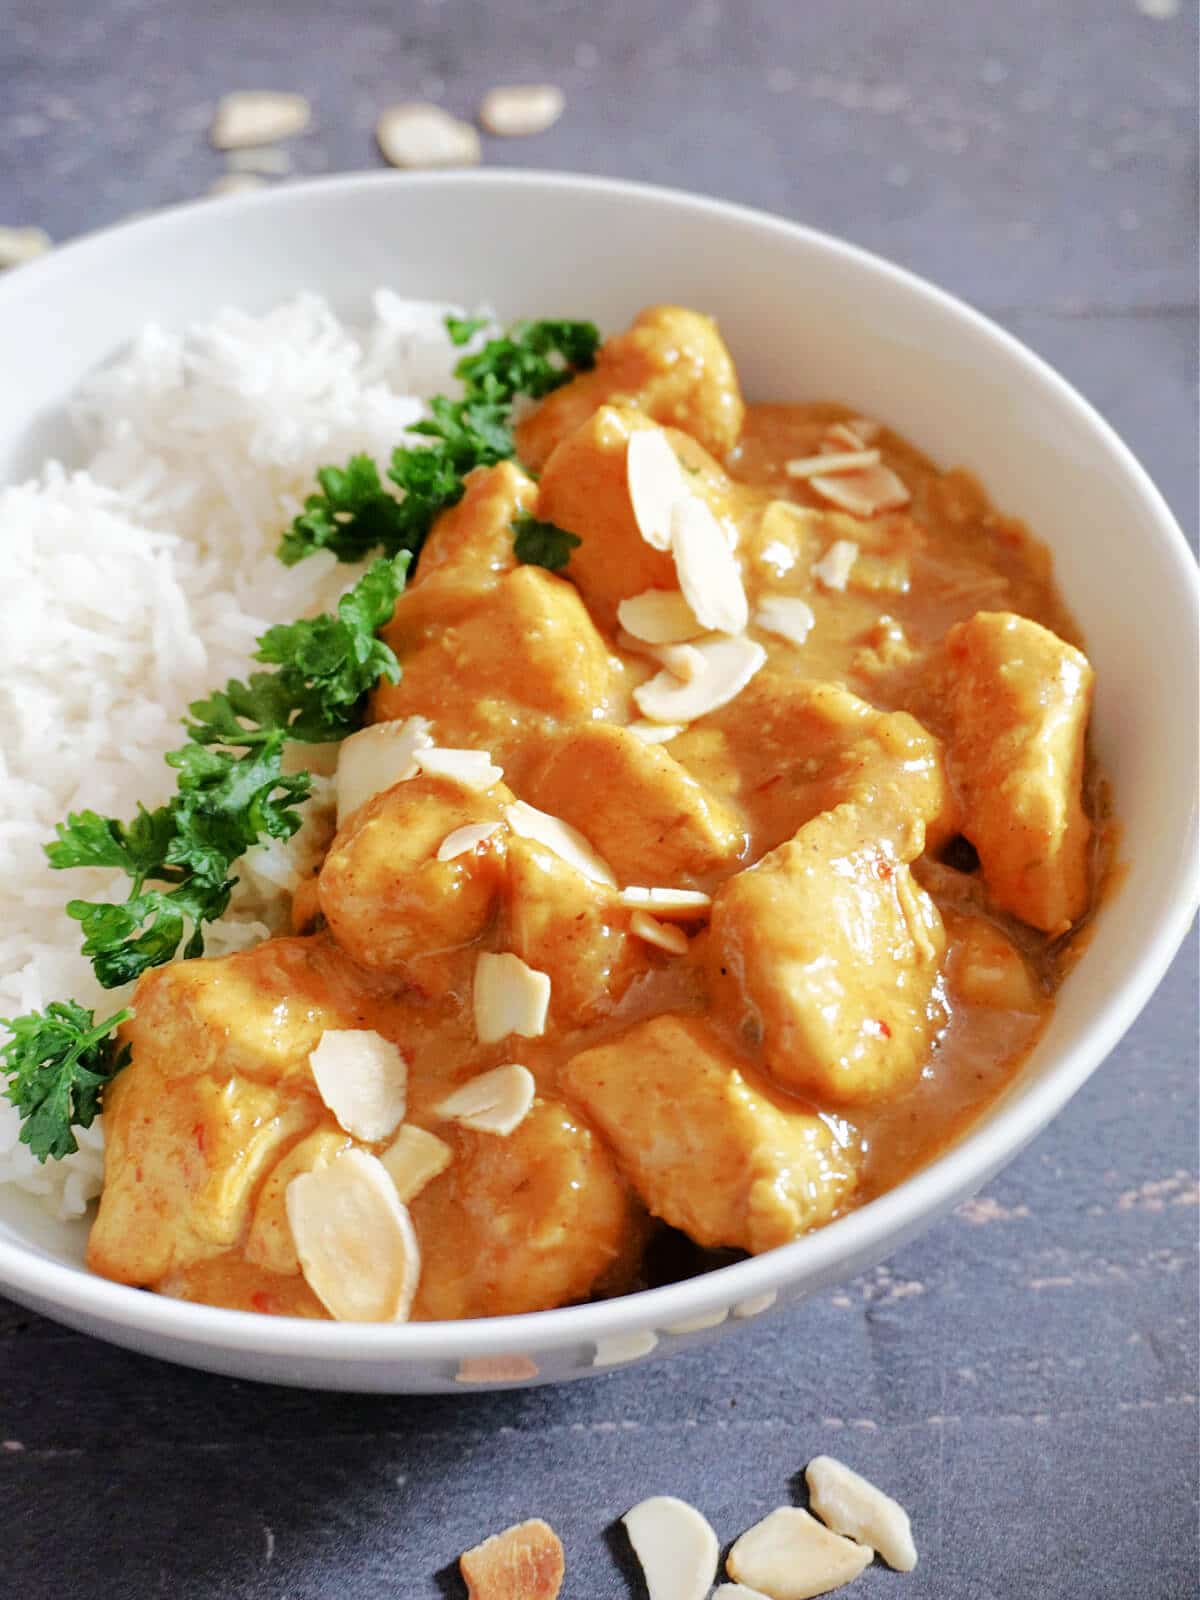 A white bowl with rice and chicken korma, garnished with parsley and almonds